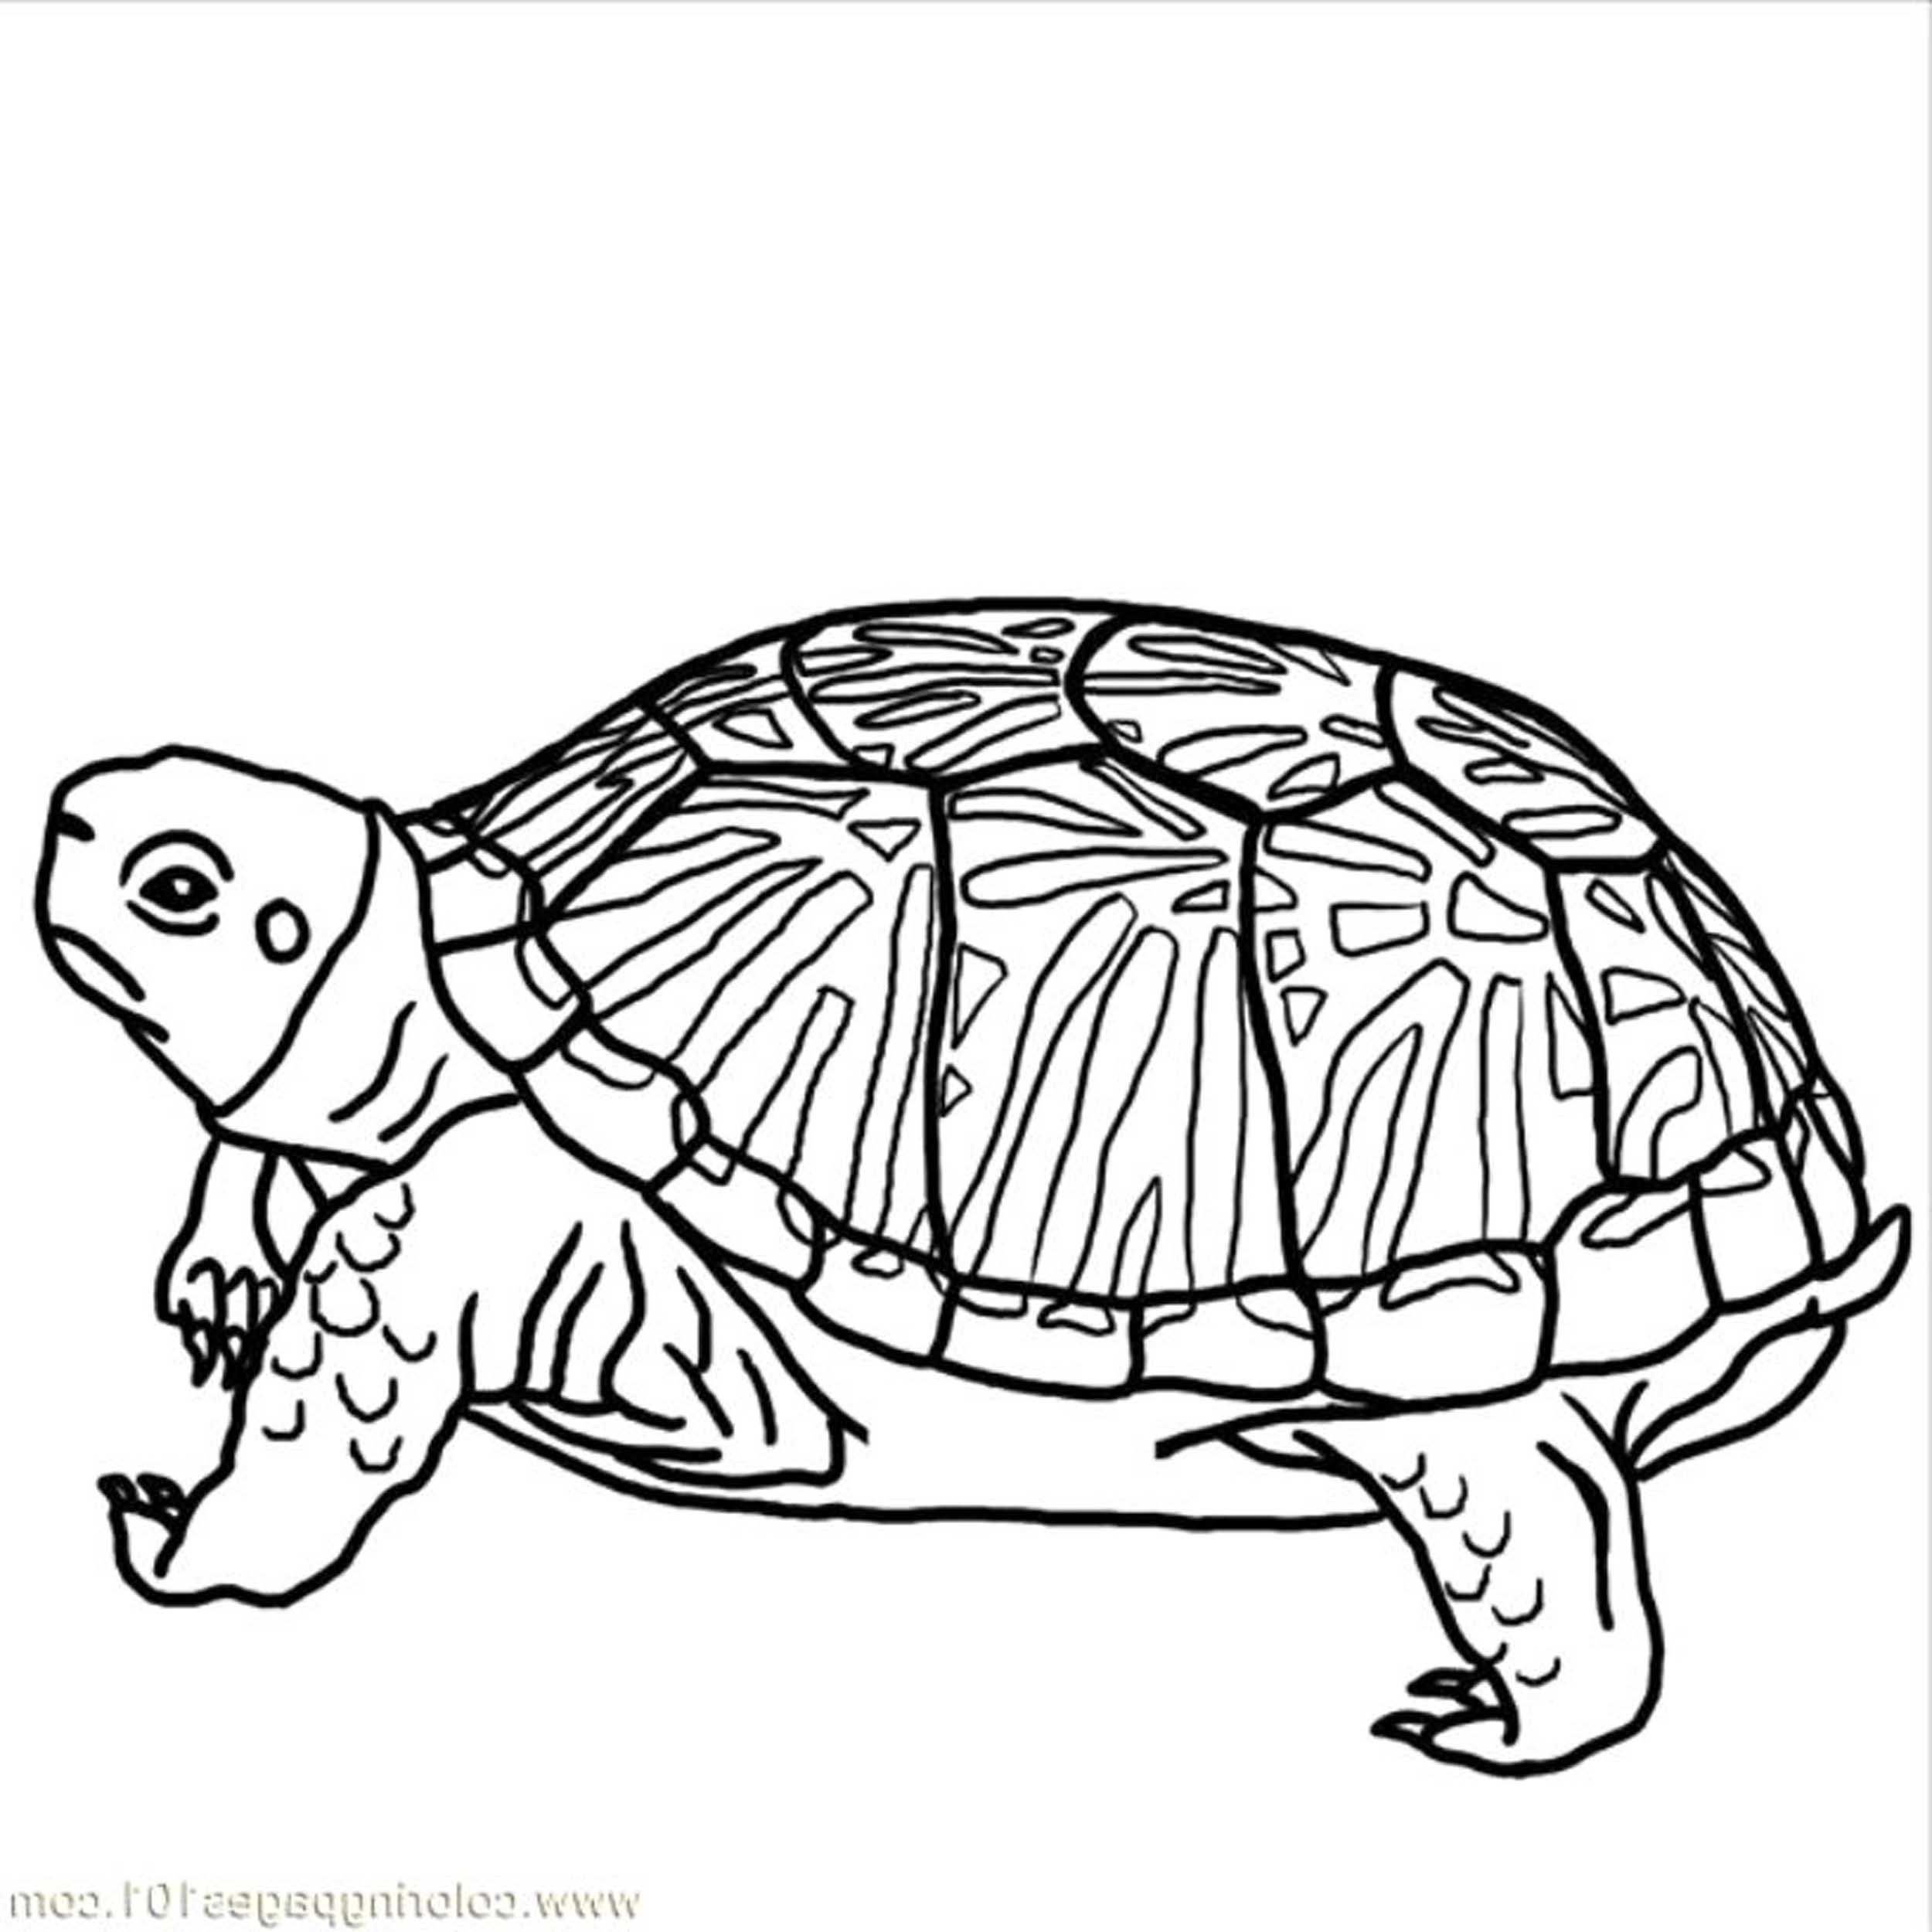 Print & Download - Turtle Coloring Pages as the ...